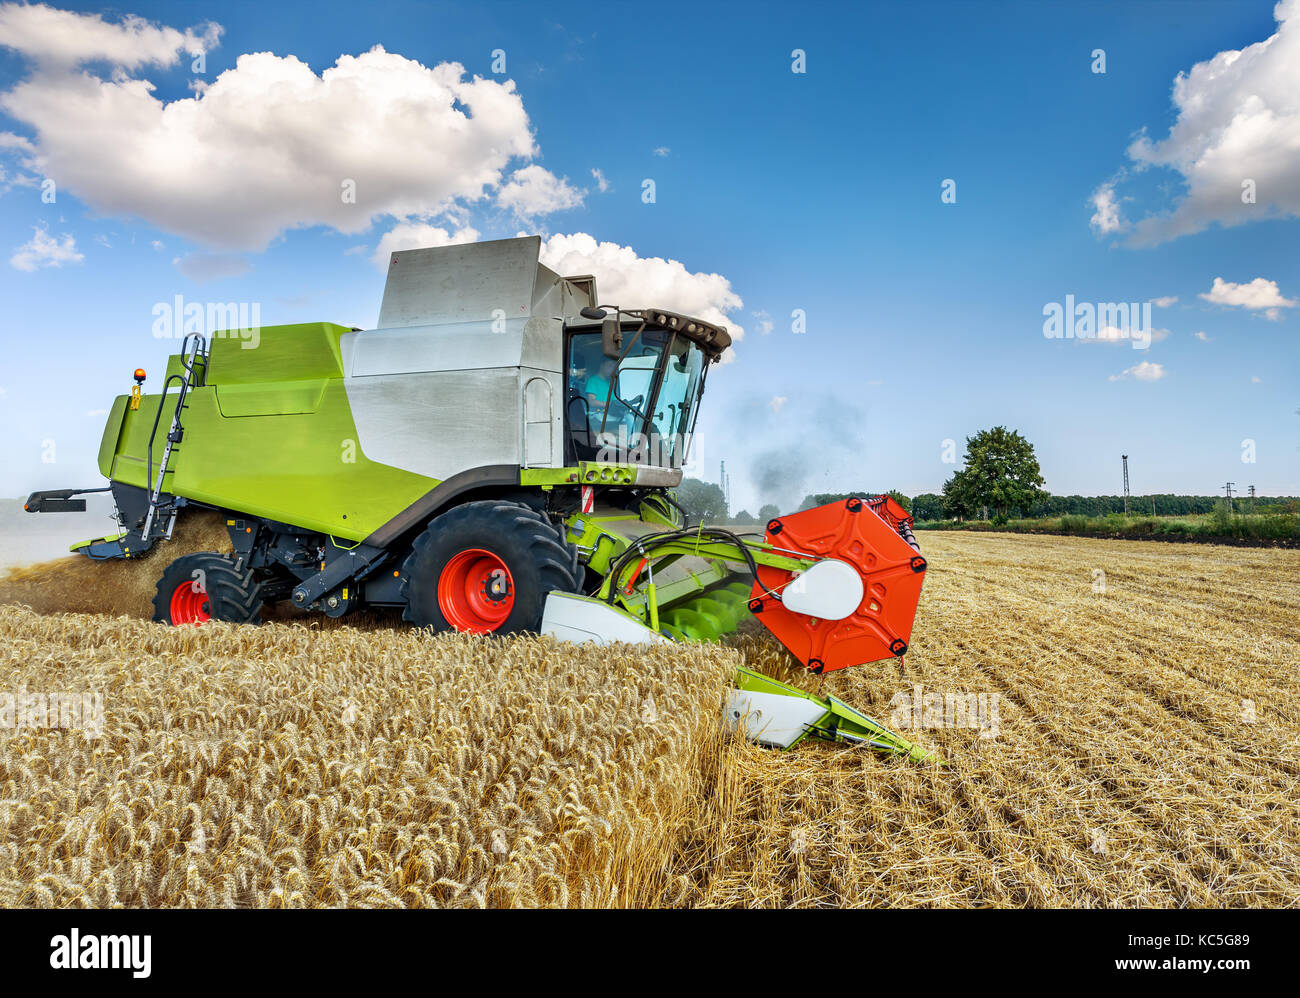 Dobrich, Bulgaria - JULY 13, 2017: Claas Lexion 660 combine harvester on display at the annual Nairn Farmers Show on July 13, 2017 in Dobrich, Bulagri Stock Photo